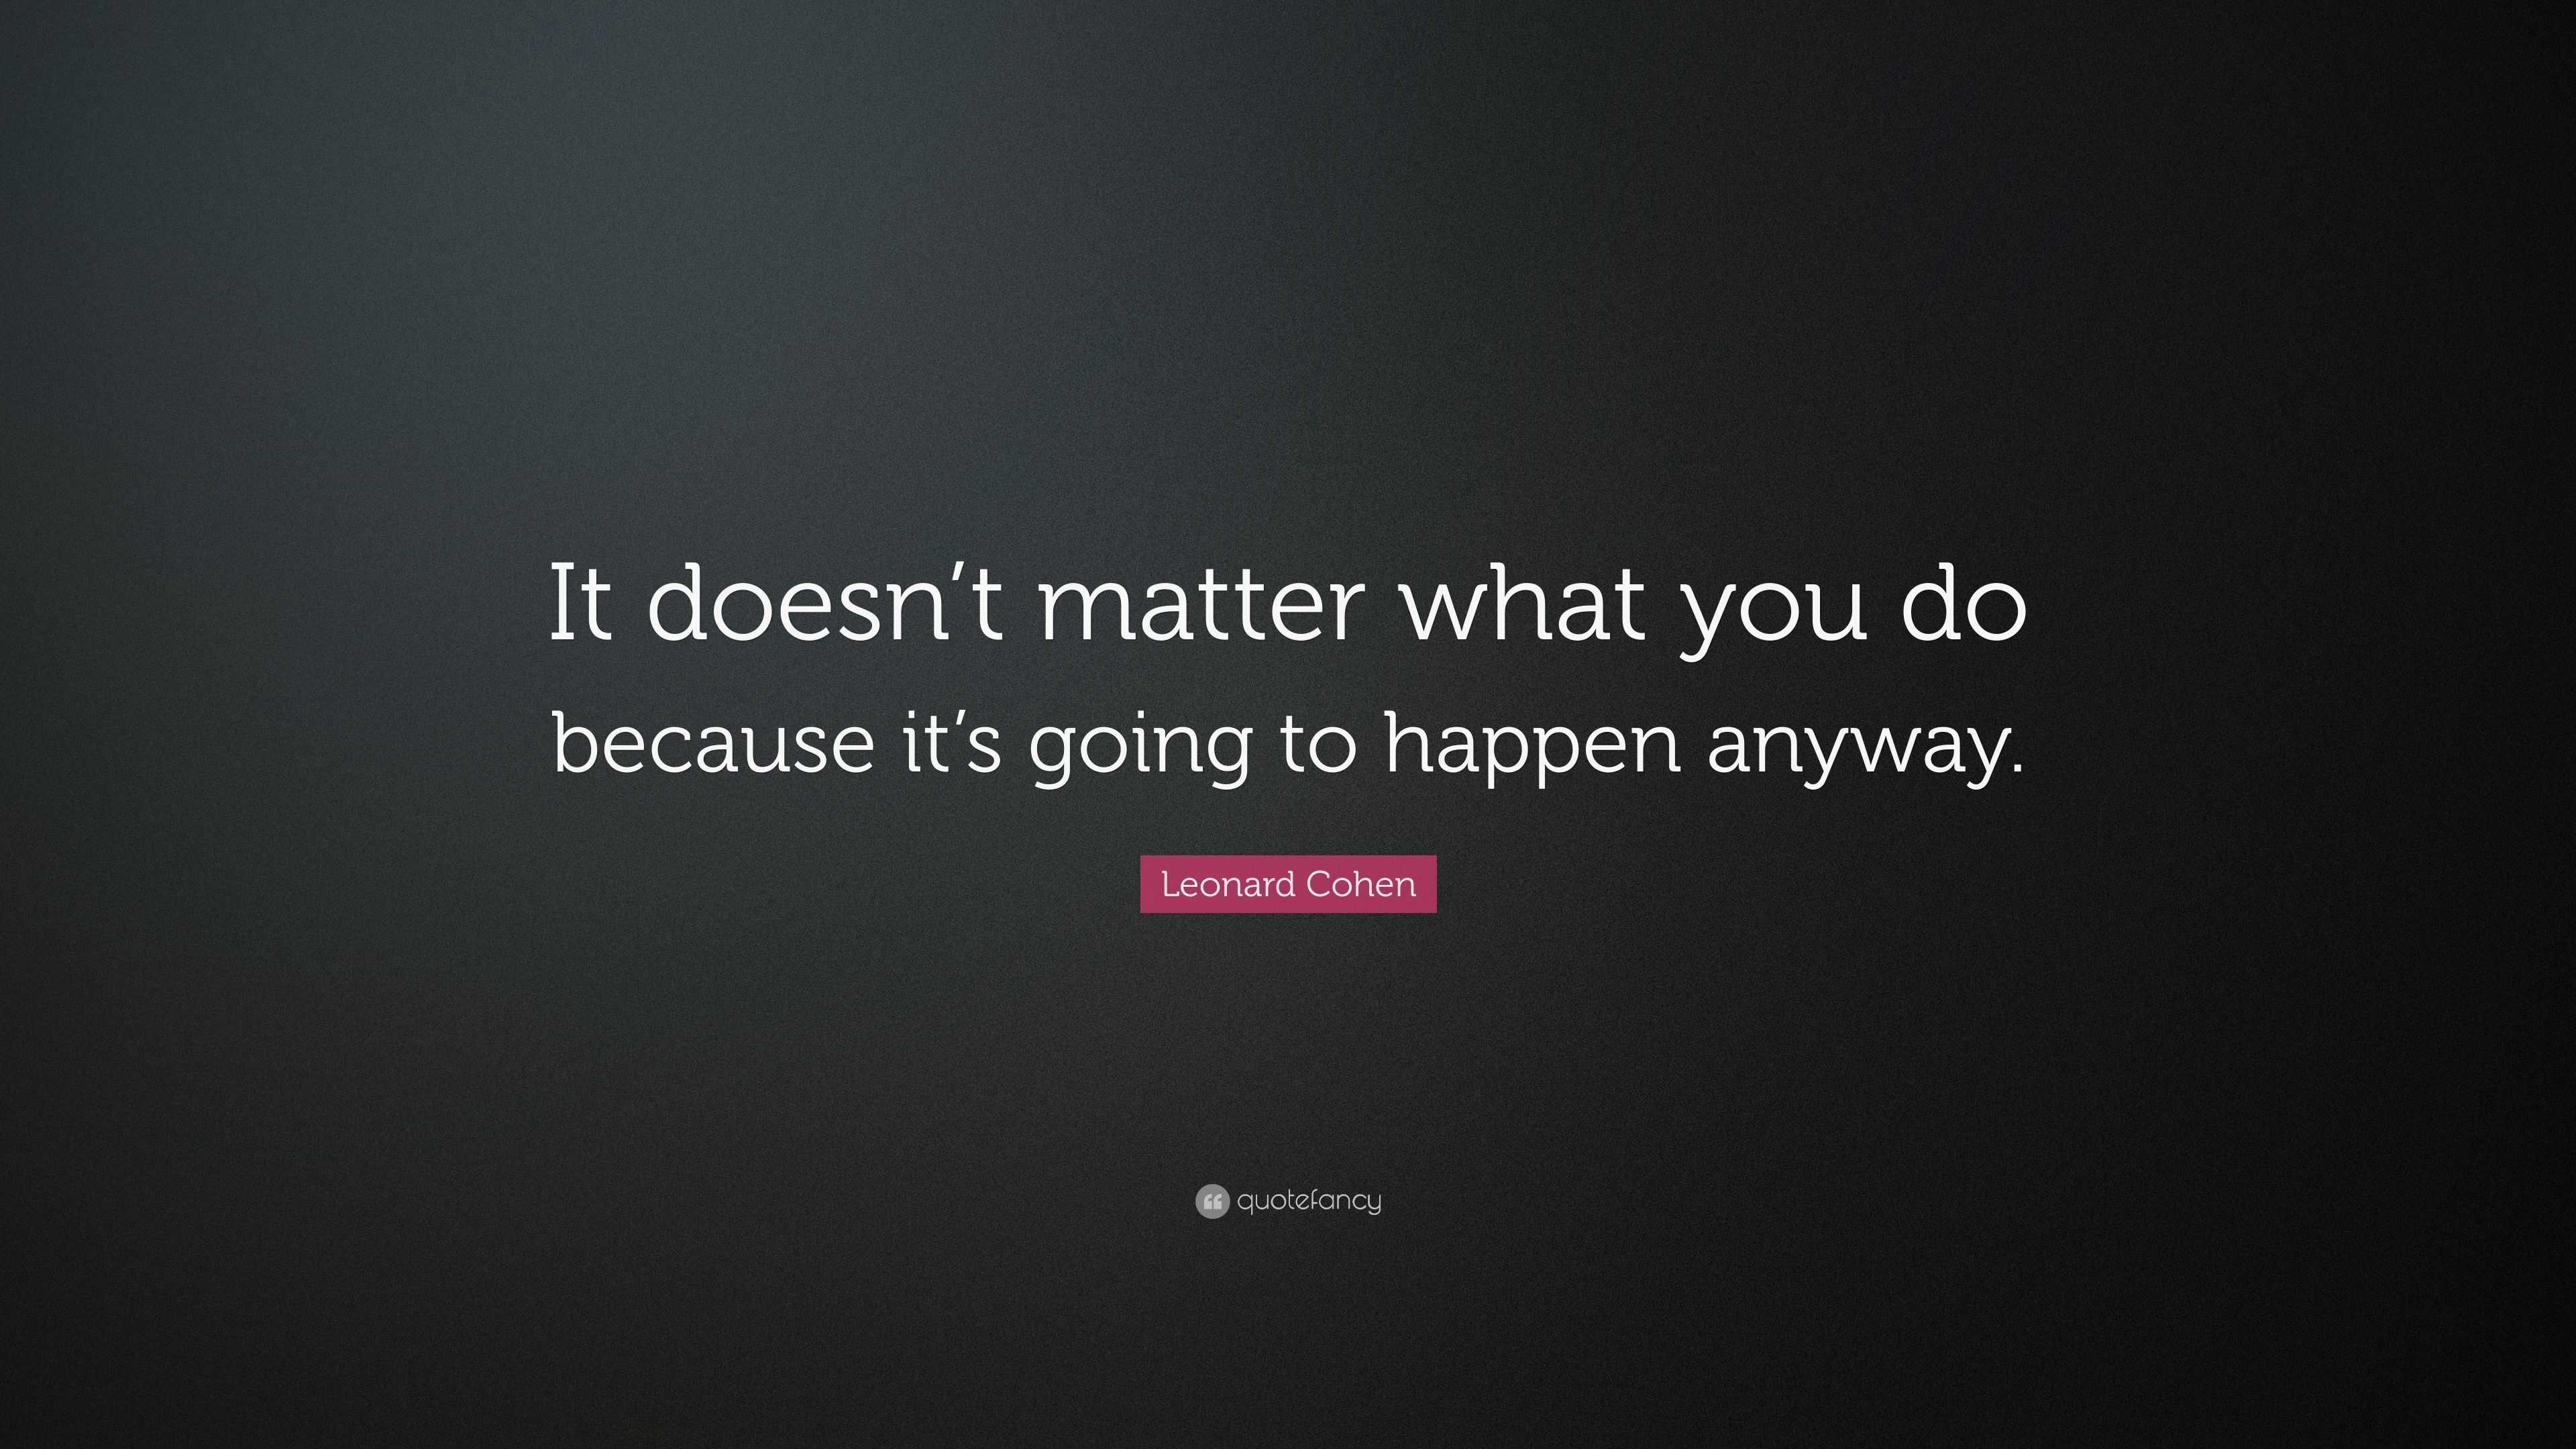 Leonard Cohen Quote: “It doesn’t matter what you do because it’s going ...